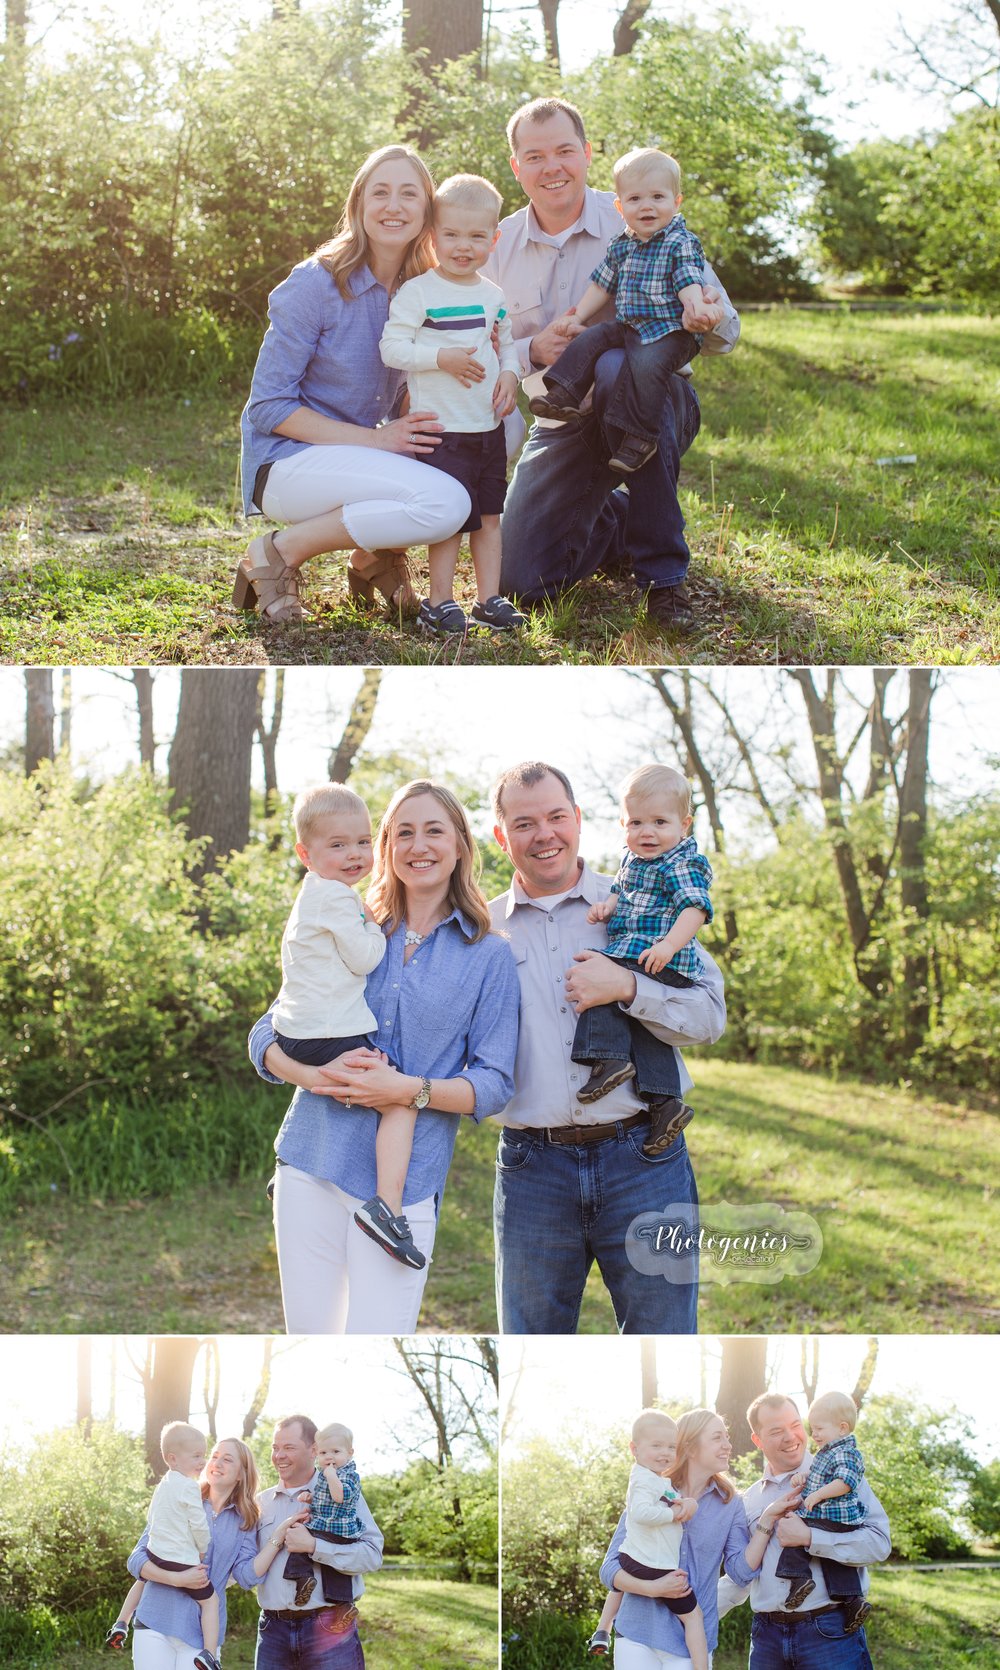  spring_morning_photography_family_of_four_poses_quilt_props_baby_brothers_mom_dad_ideas_photography_missouri_photographer 1 